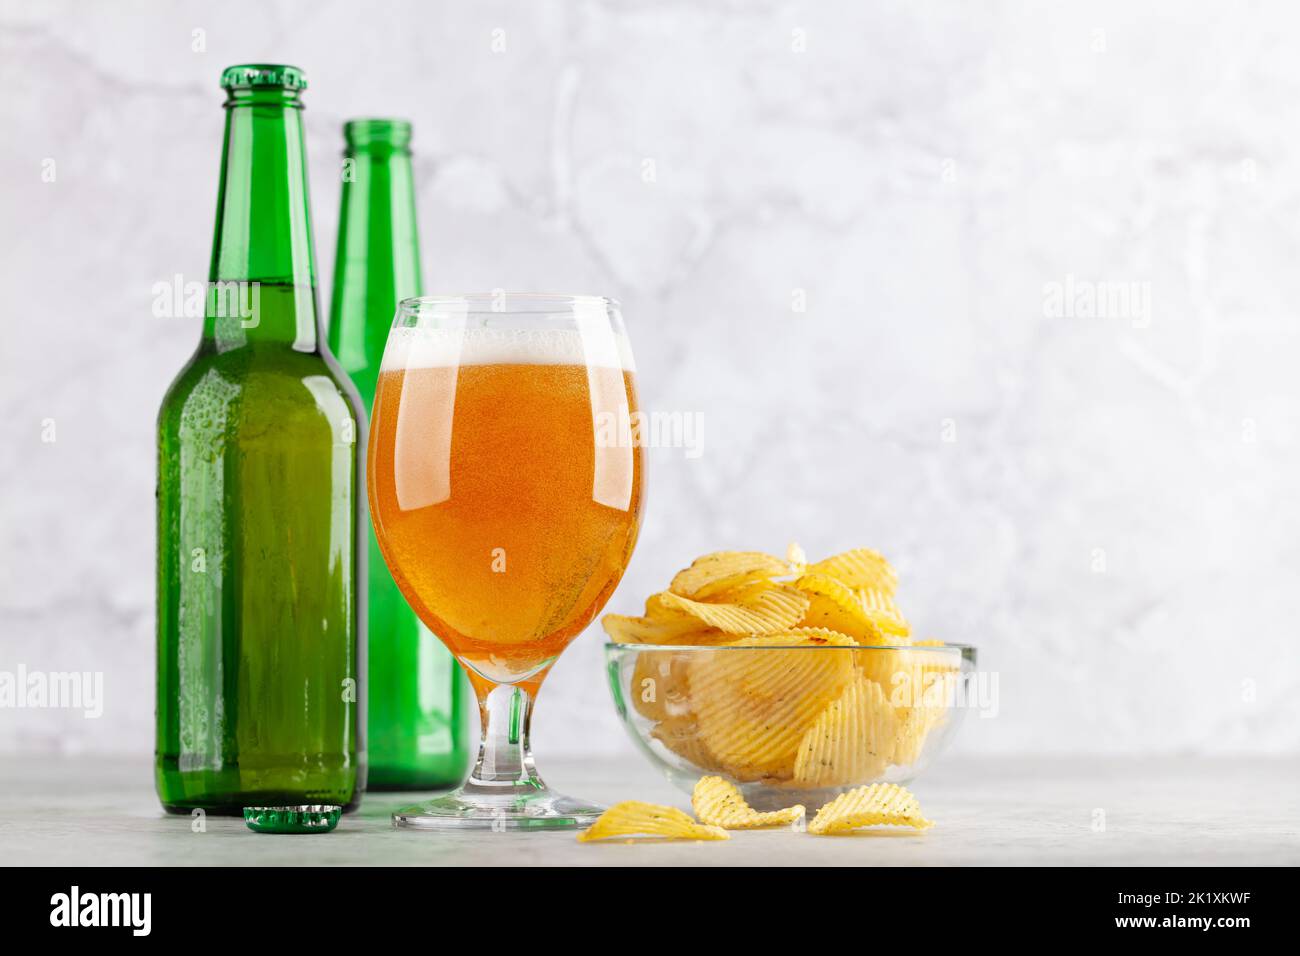 Beer glass, beer bottles and potato chips. With copy space Stock Photo